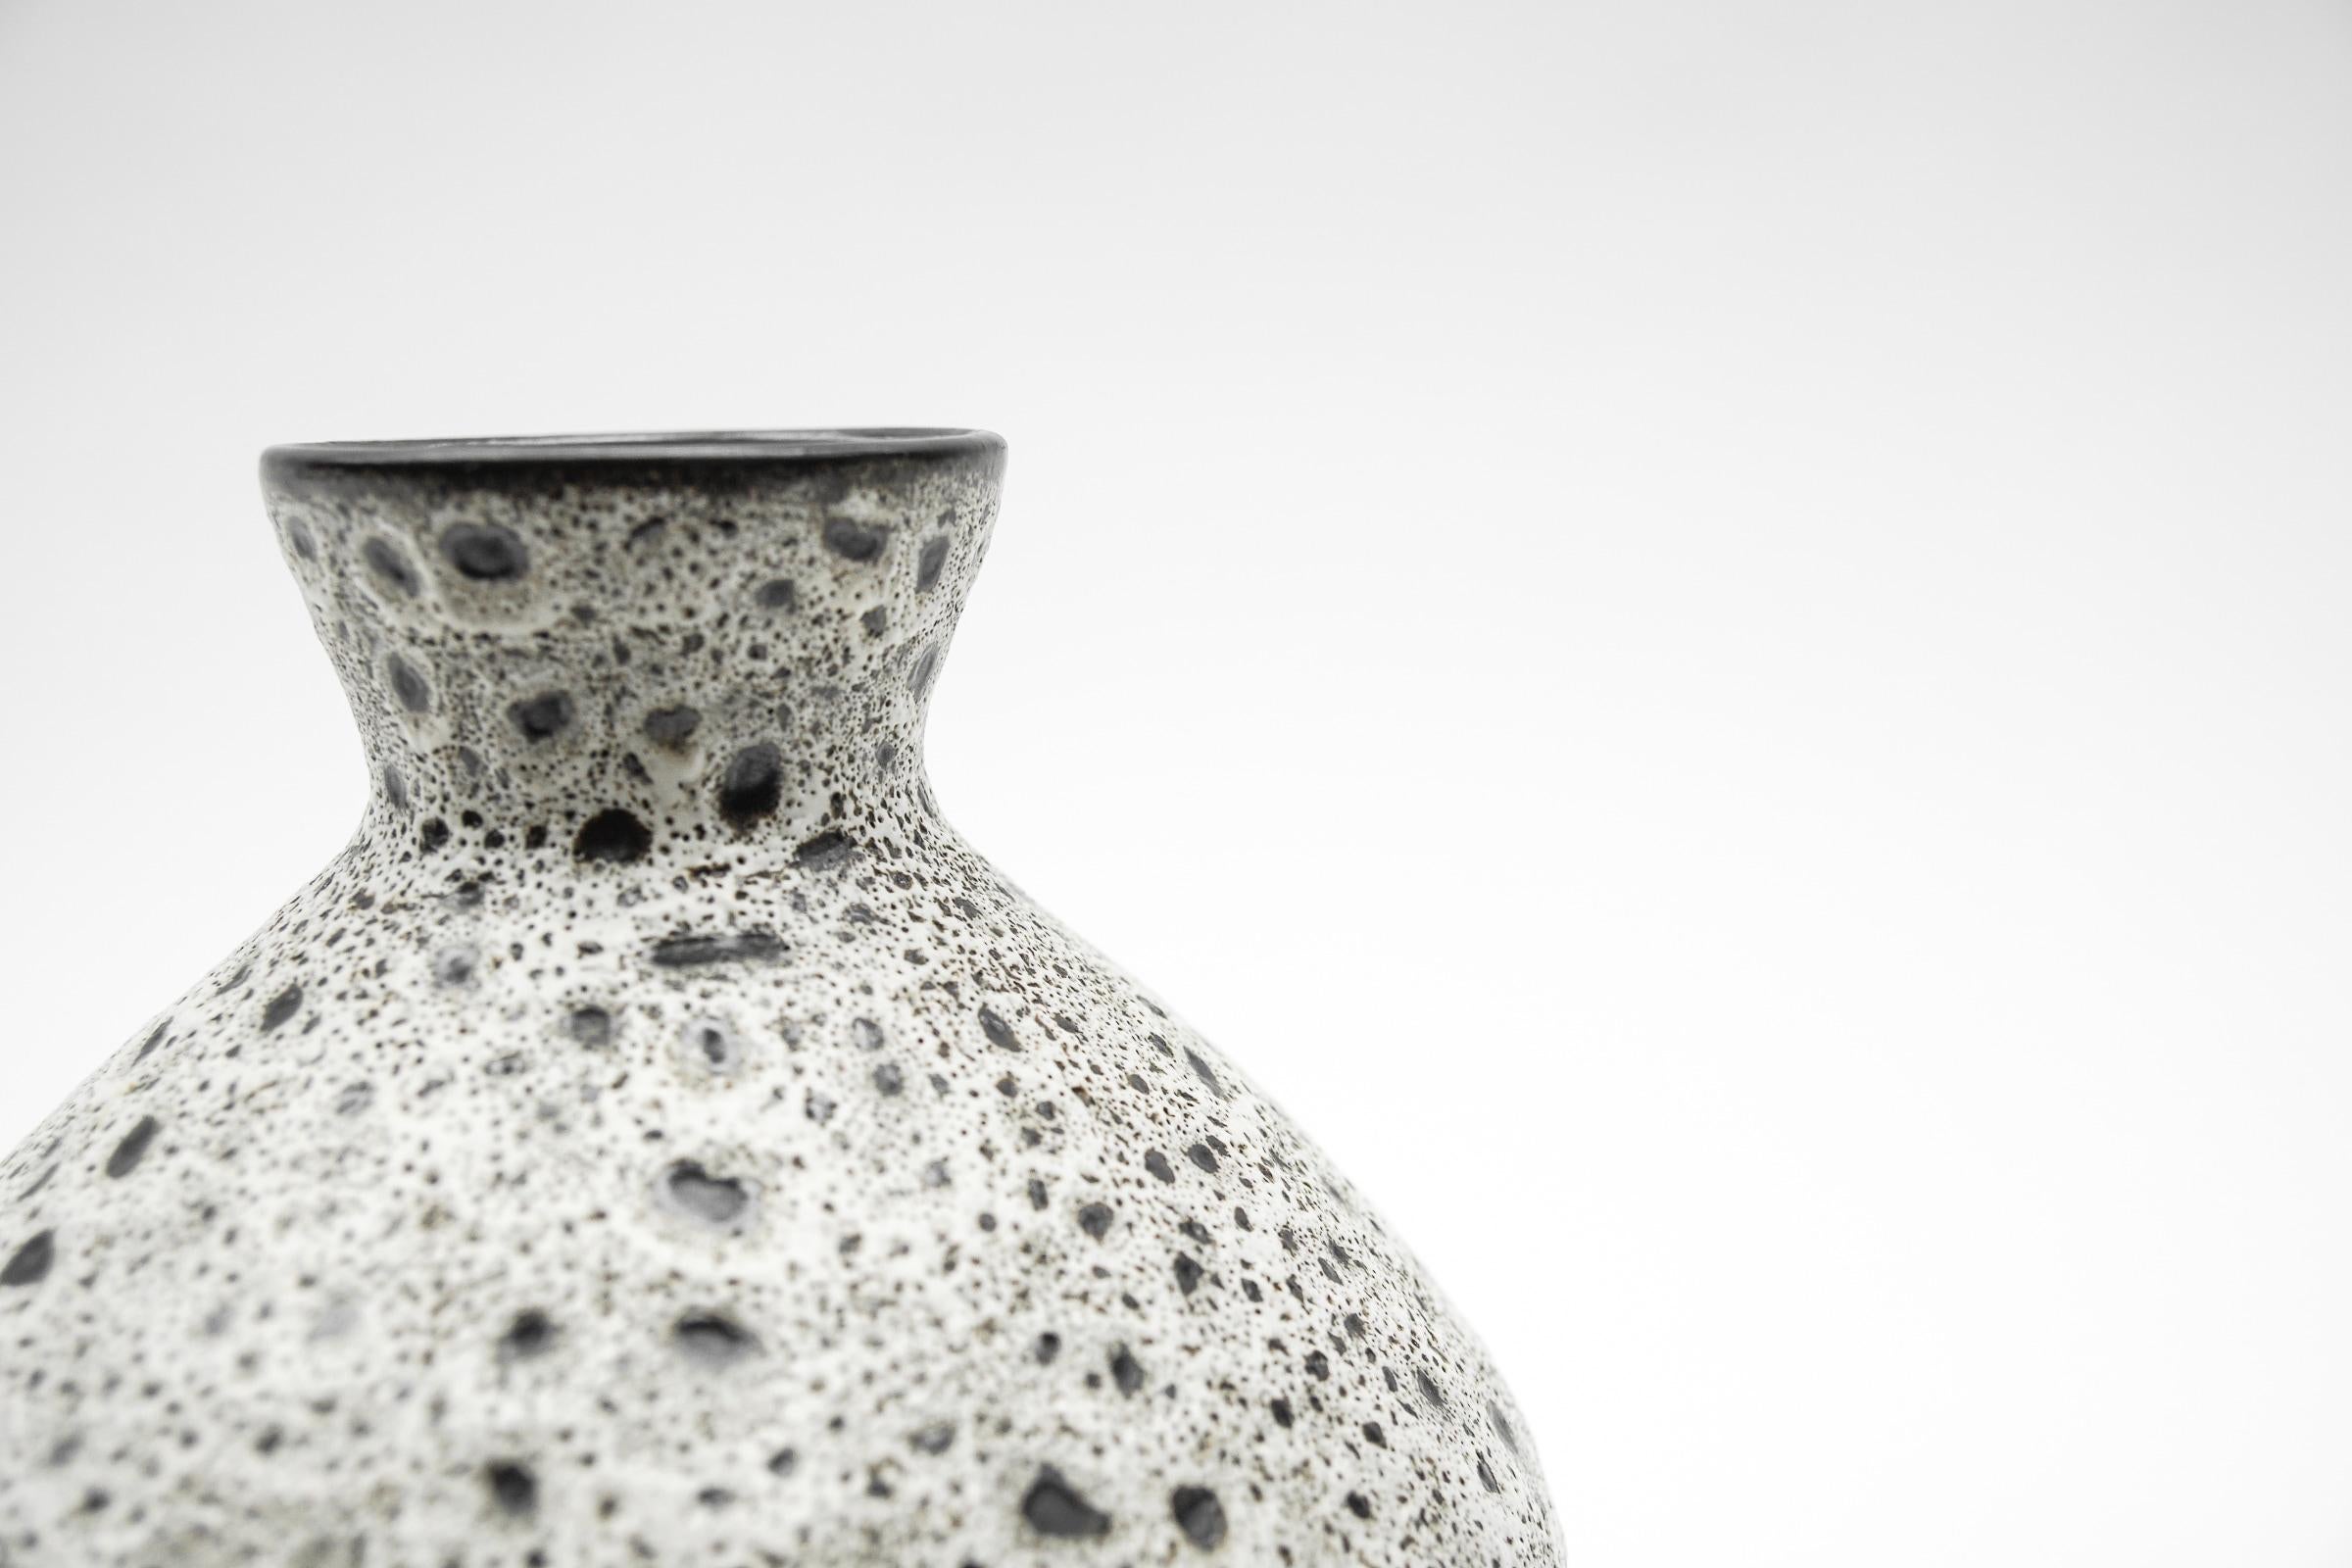 White & Black Studio Ceramic Vase by Wilhelm & Elly Kuch, 1960s, Germany In Good Condition For Sale In Nürnberg, Bayern